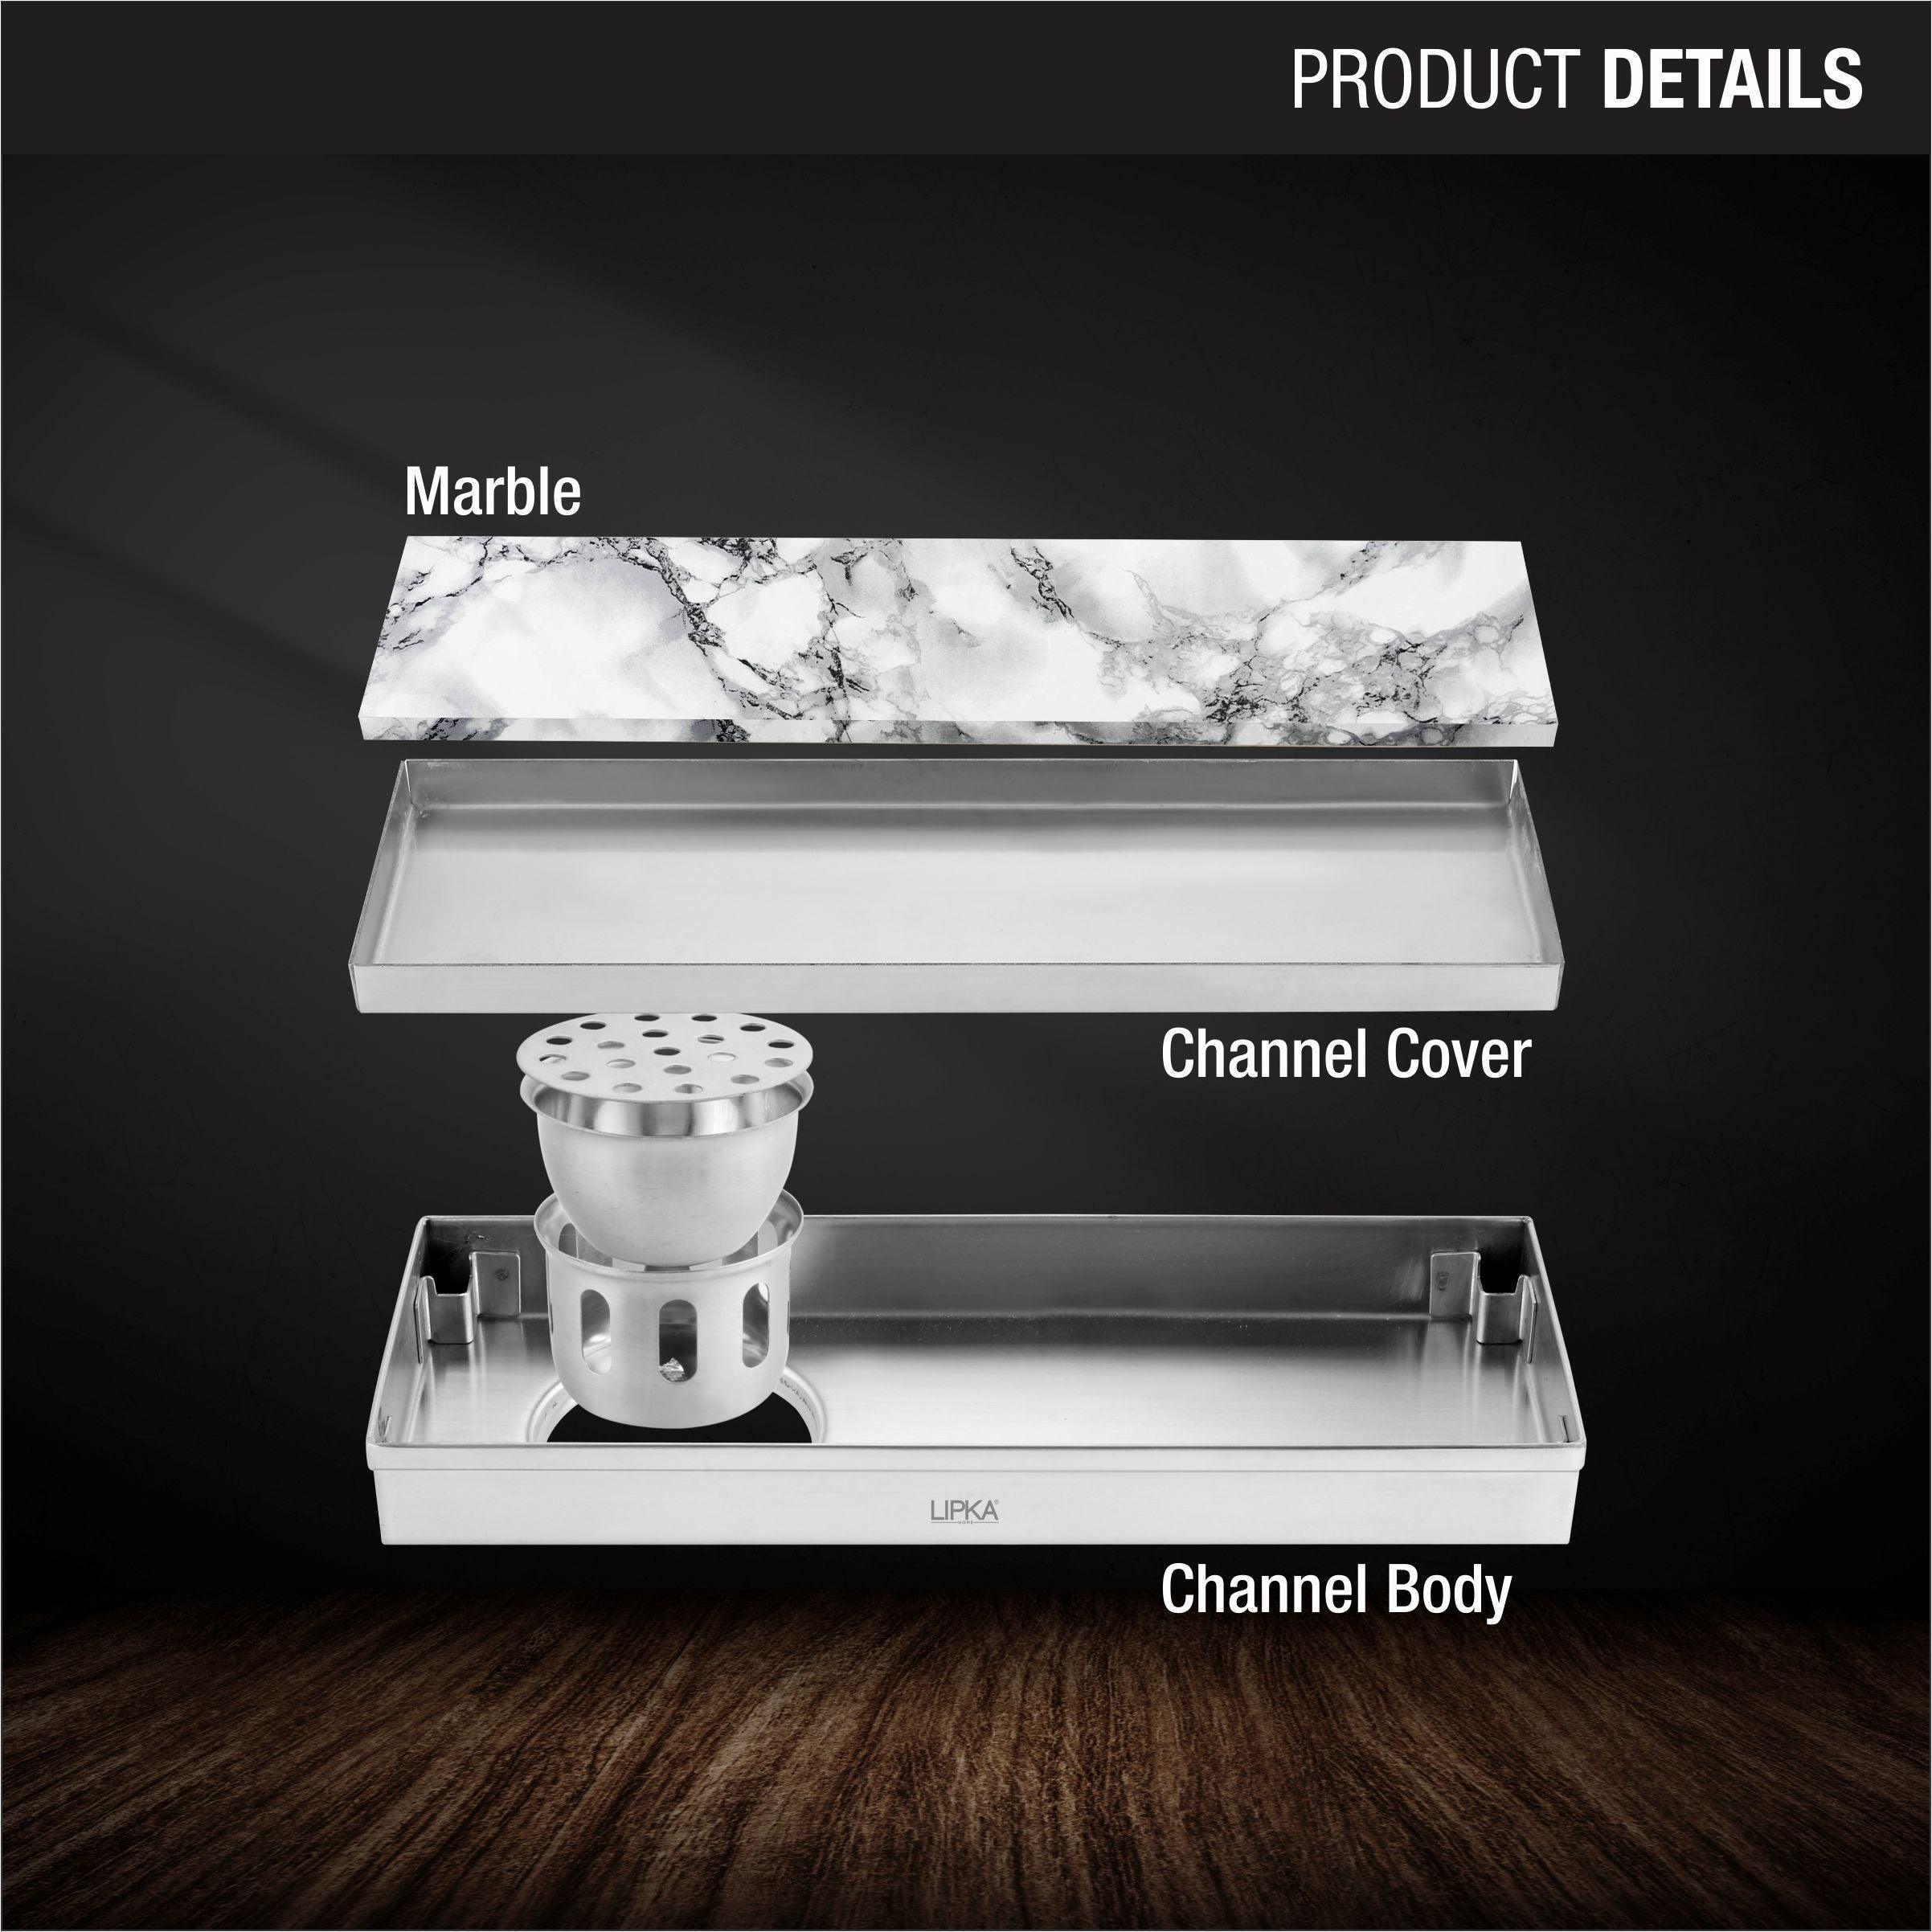 Marble Insert Shower Drain Channel (18 x 3 Inches) product details